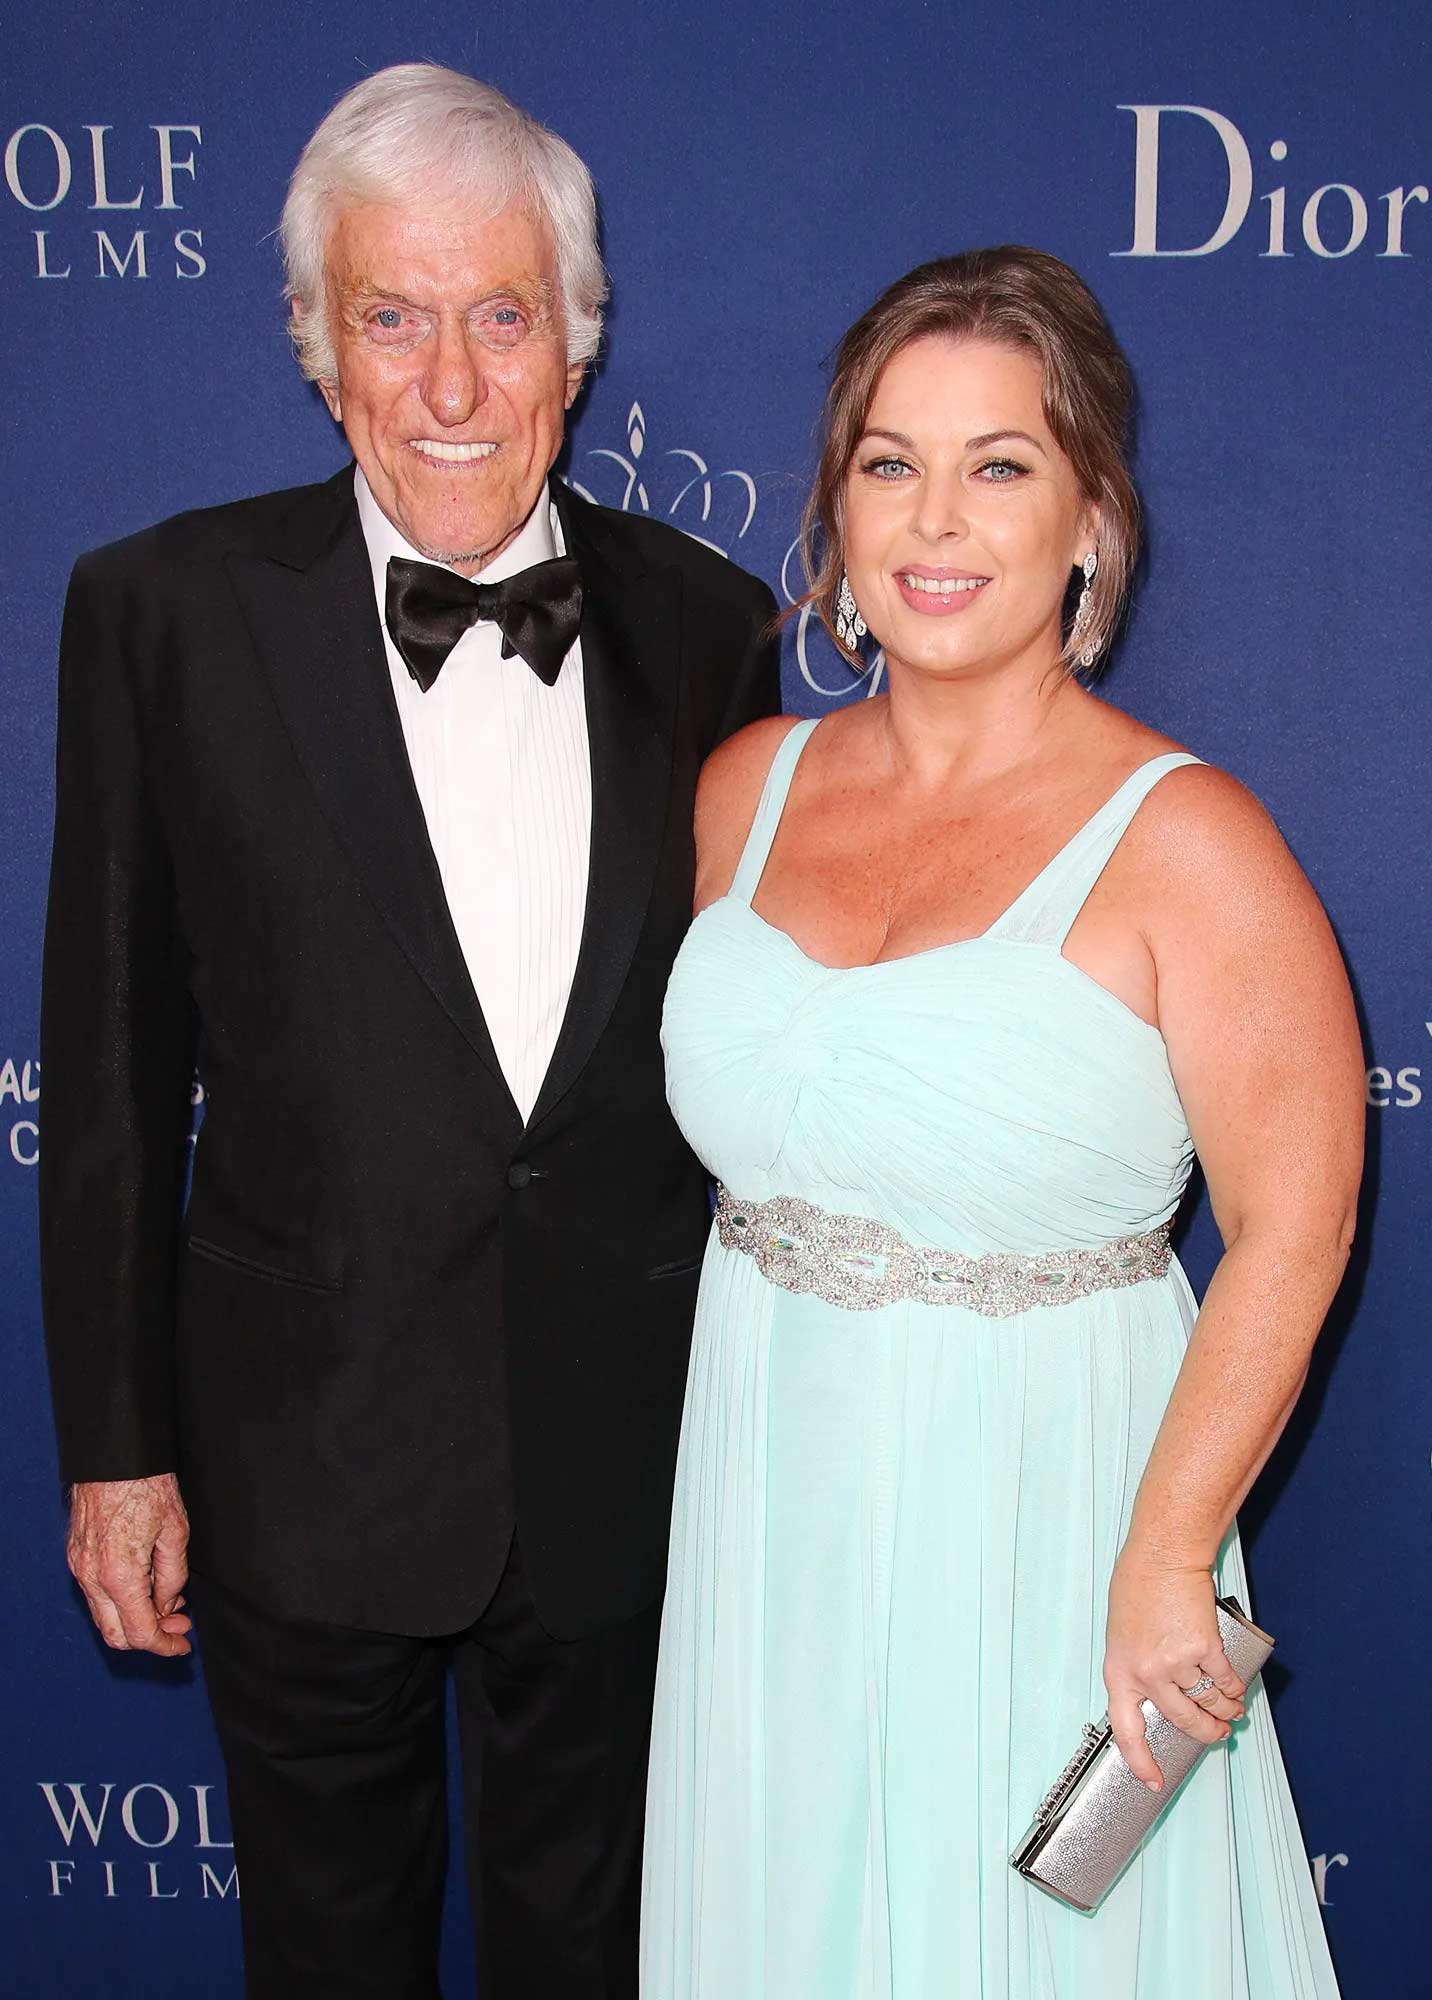 Arlene Silver supported Dick Van Dyke after his long time girlfriends death